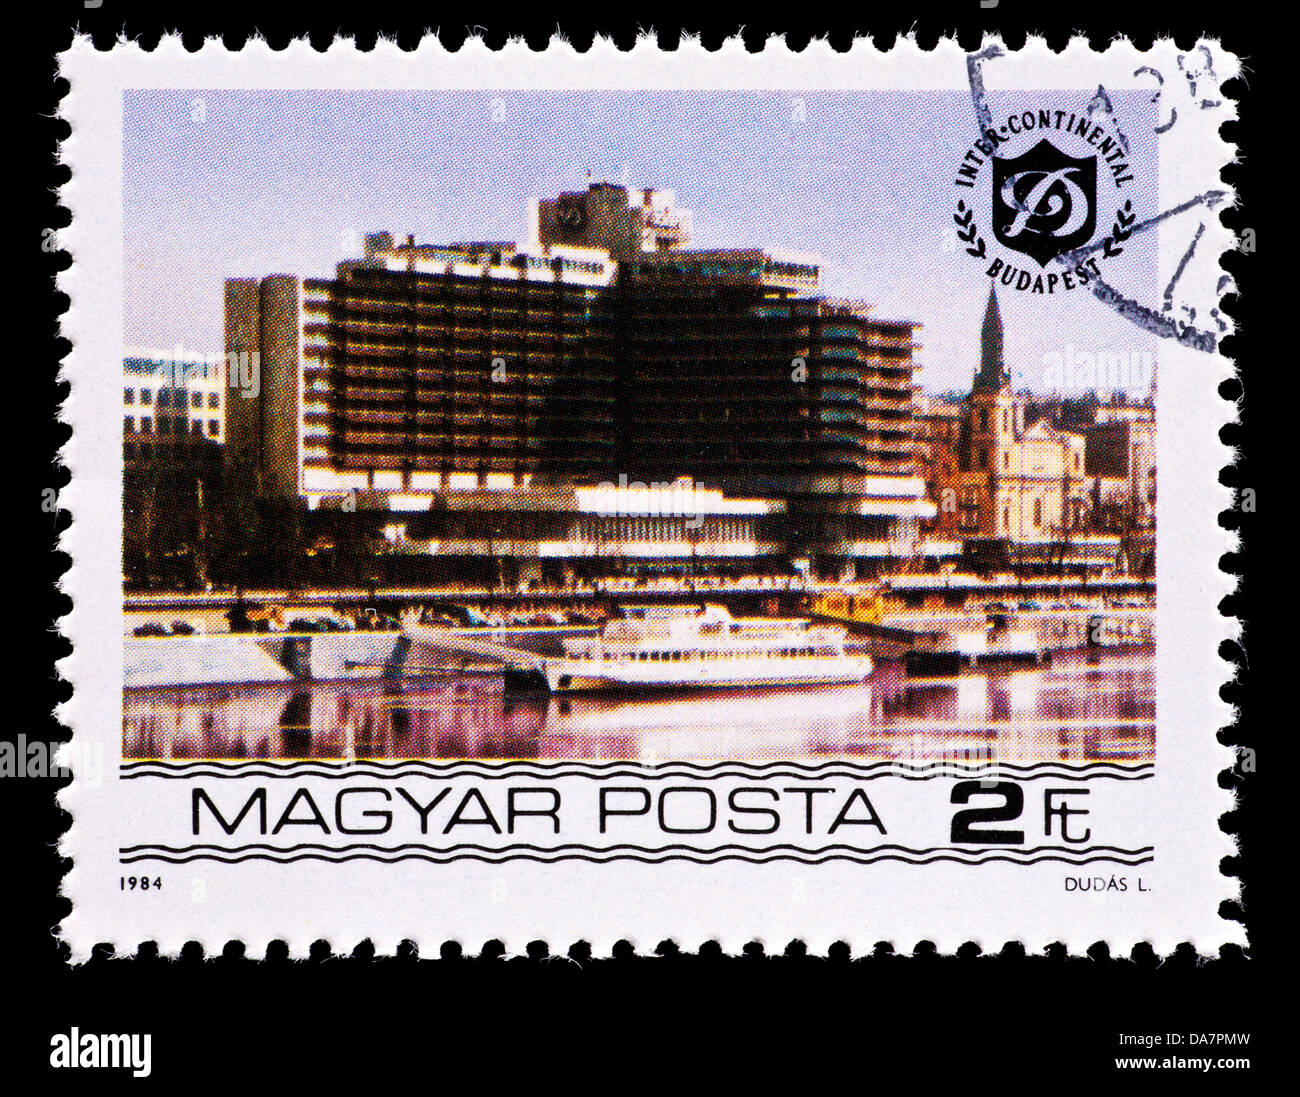 Postage stamp from Hungary depicting the Duna Intercontinental Hotel in Budapest. Stock Photo